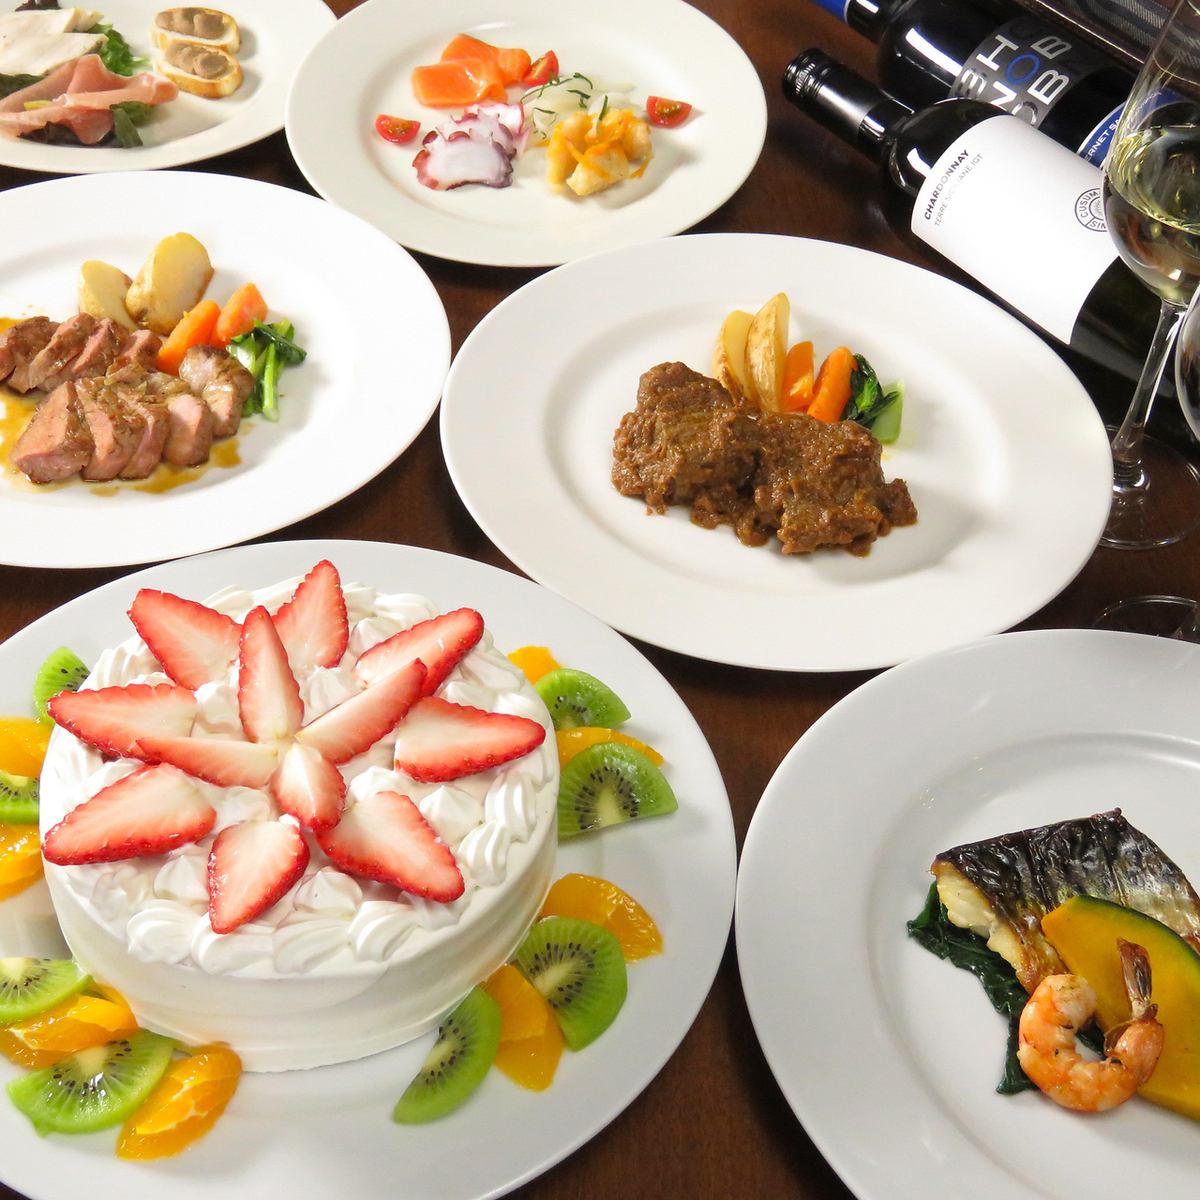 Surprise yourself with a chef's homemade gateau fromage or whole cake♪